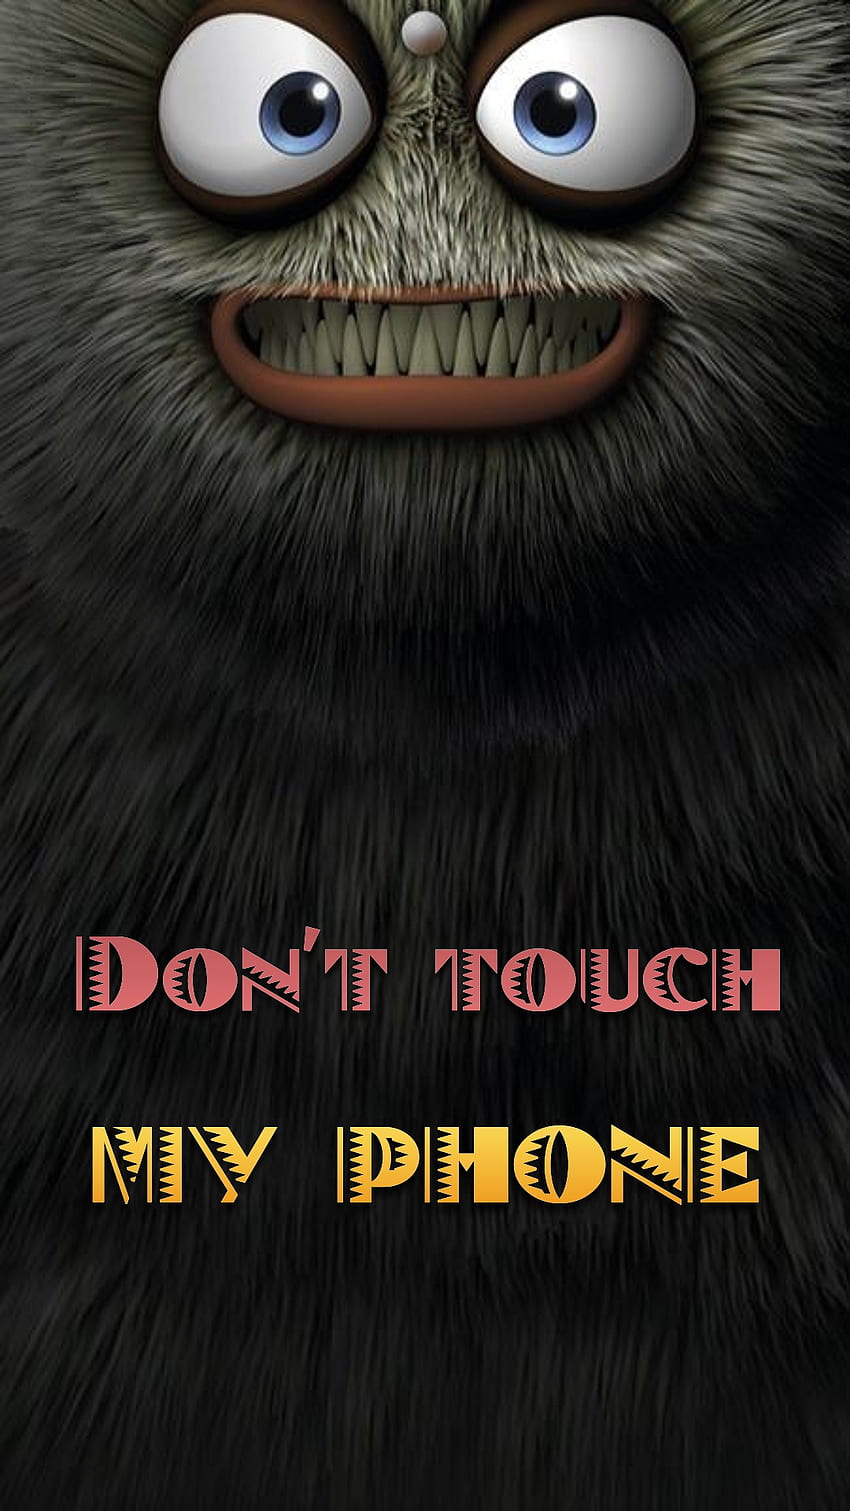 Dont touch my phone, sayings, mouth, cartoon, lock-screen, angry, eyes HD phone wallpaper